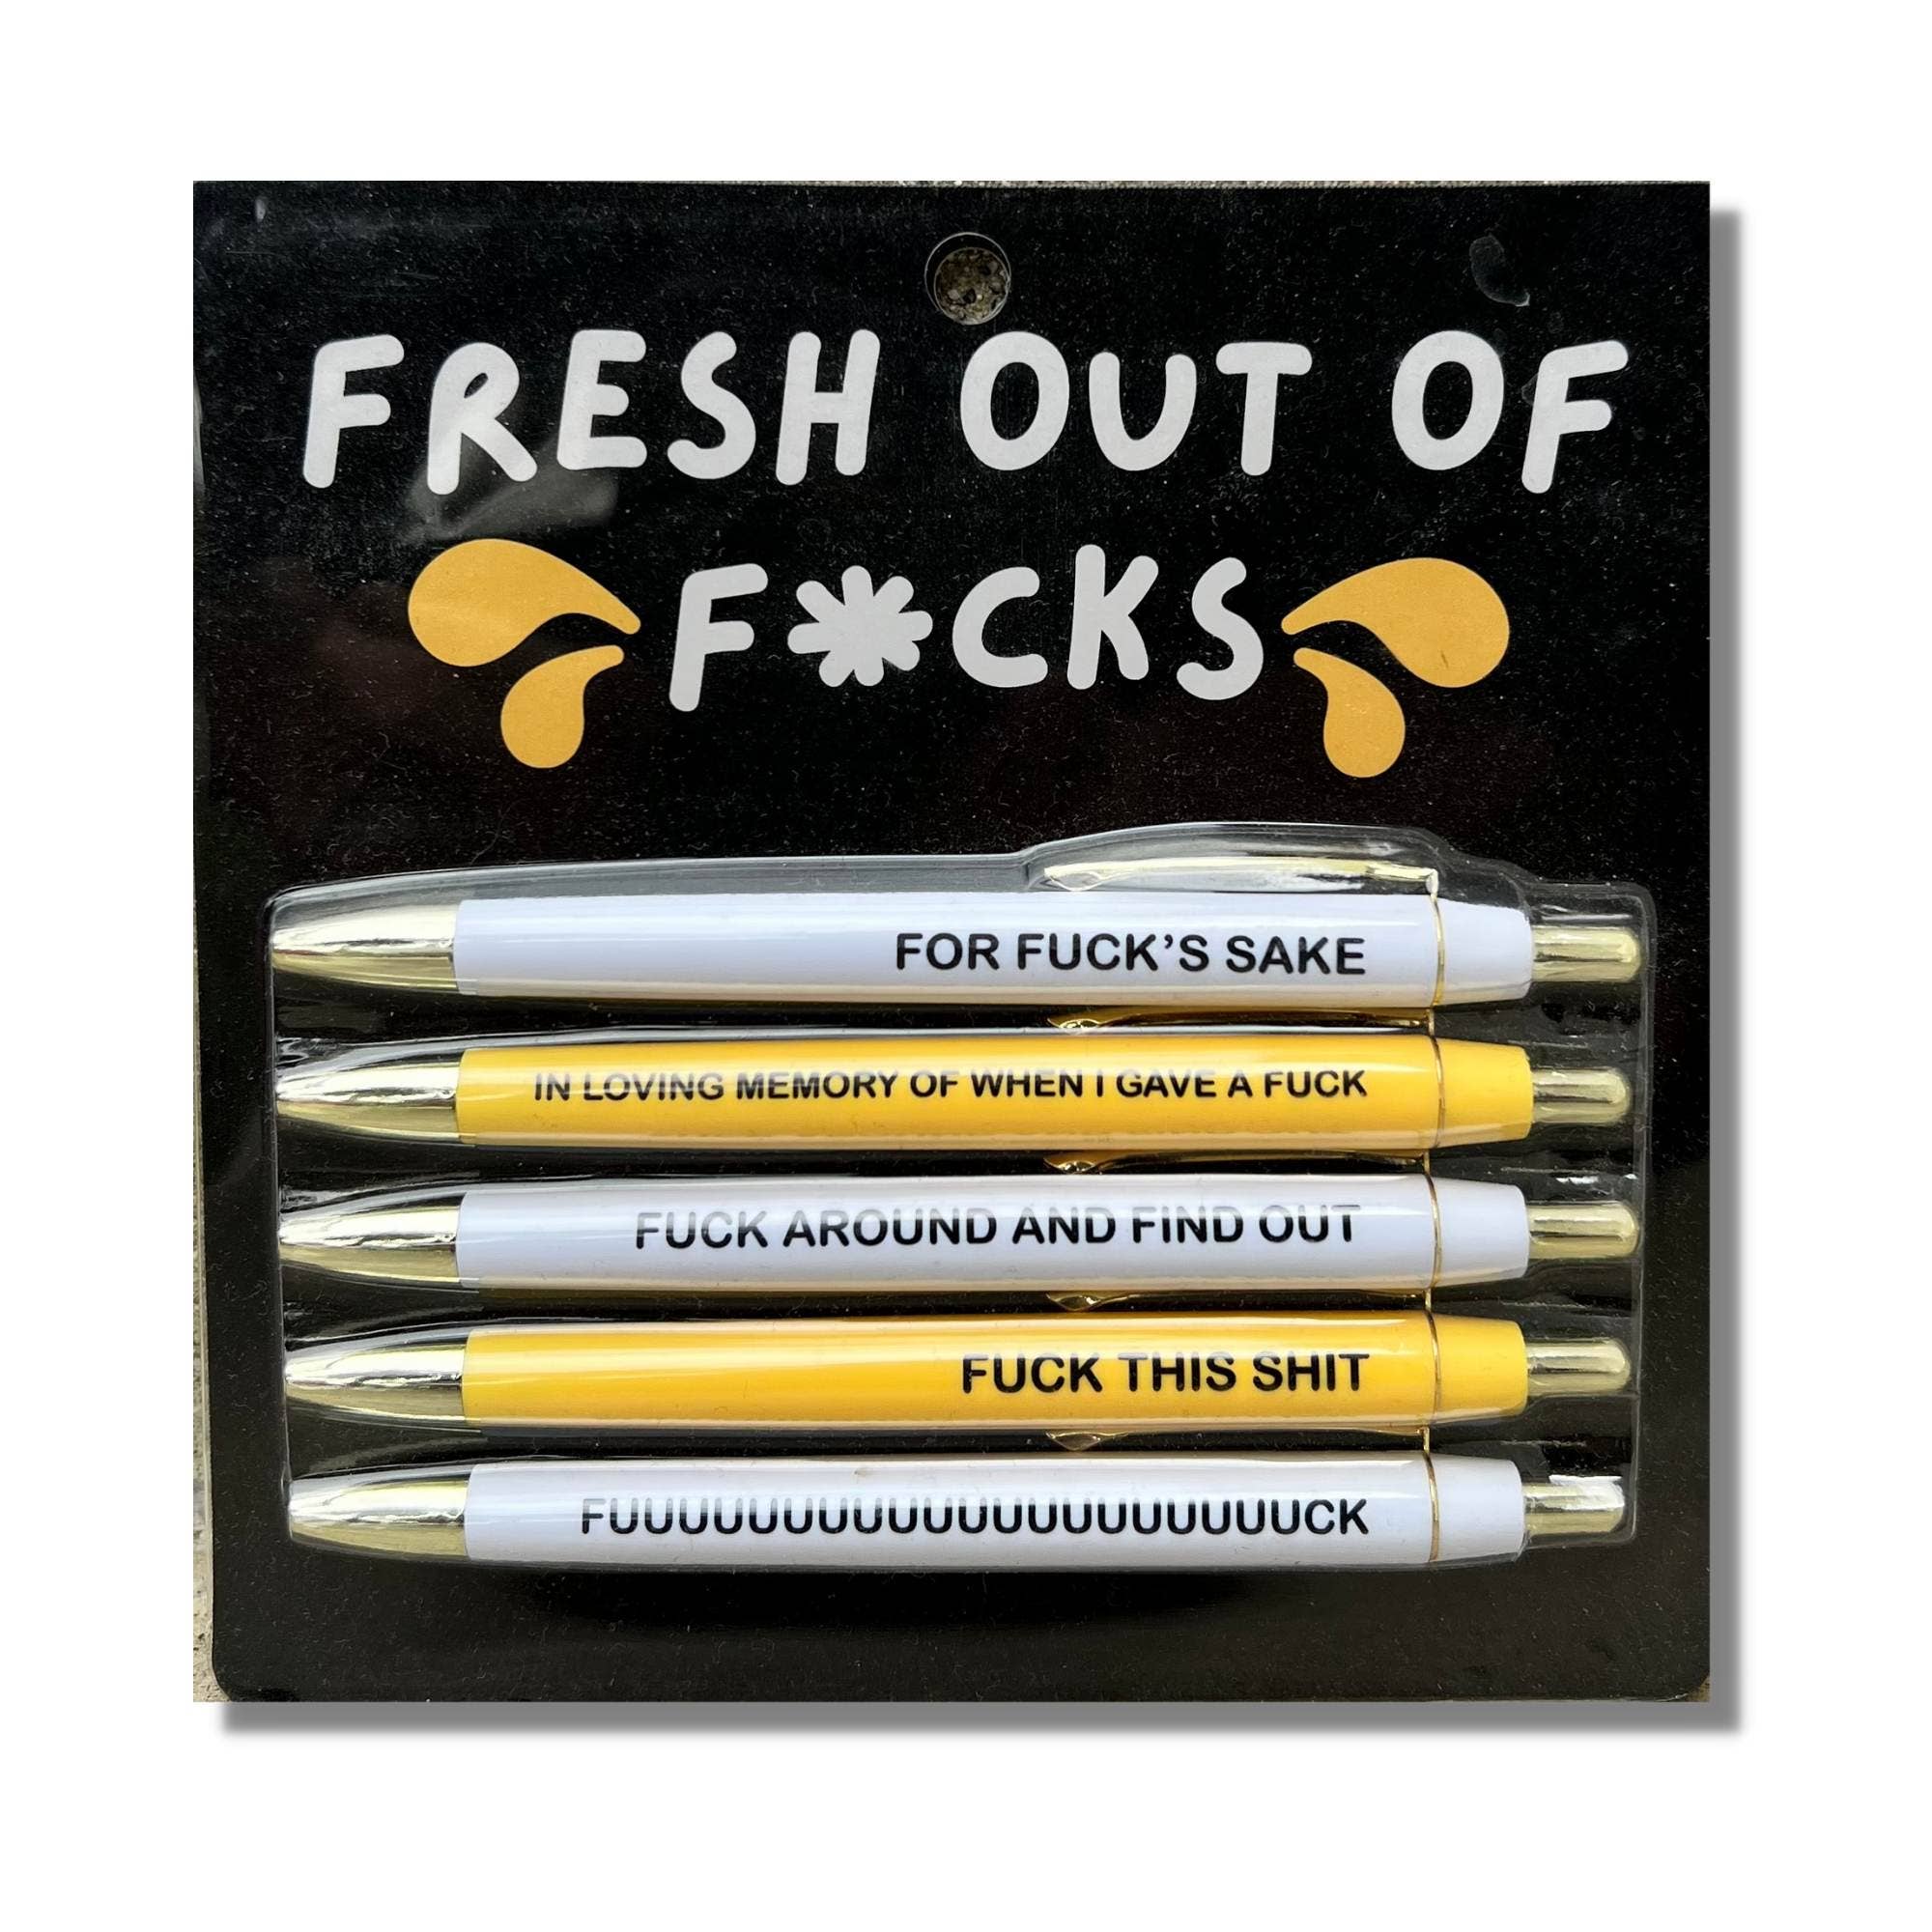 Swear Word Pen Set, NSFW Funny Pens with Sayings for Adults in Gift Box